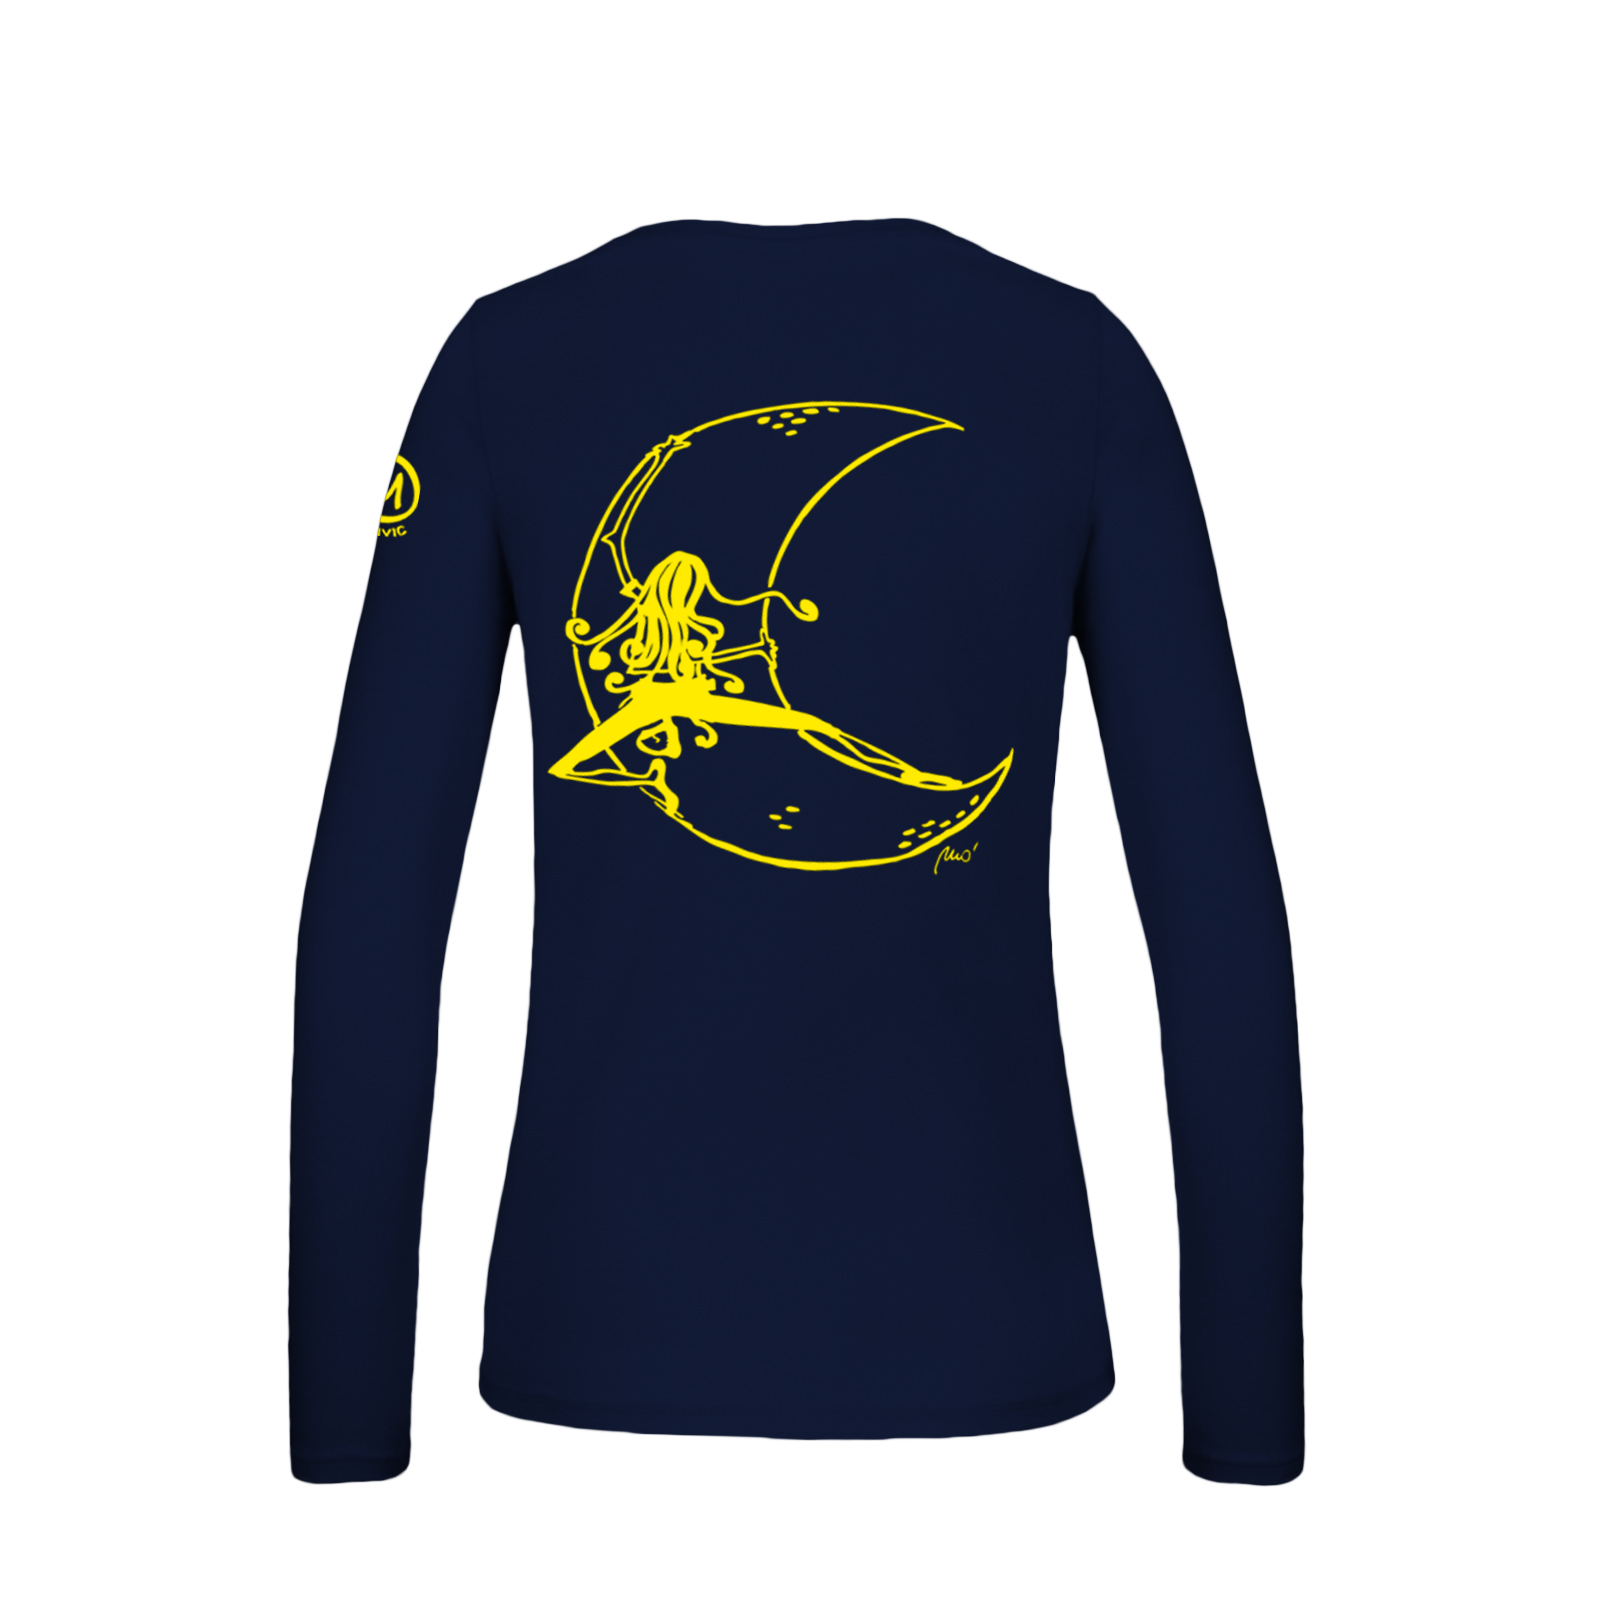 Long sleeved t-shirt women navy blue for climbing MOLLY Round neck Moon